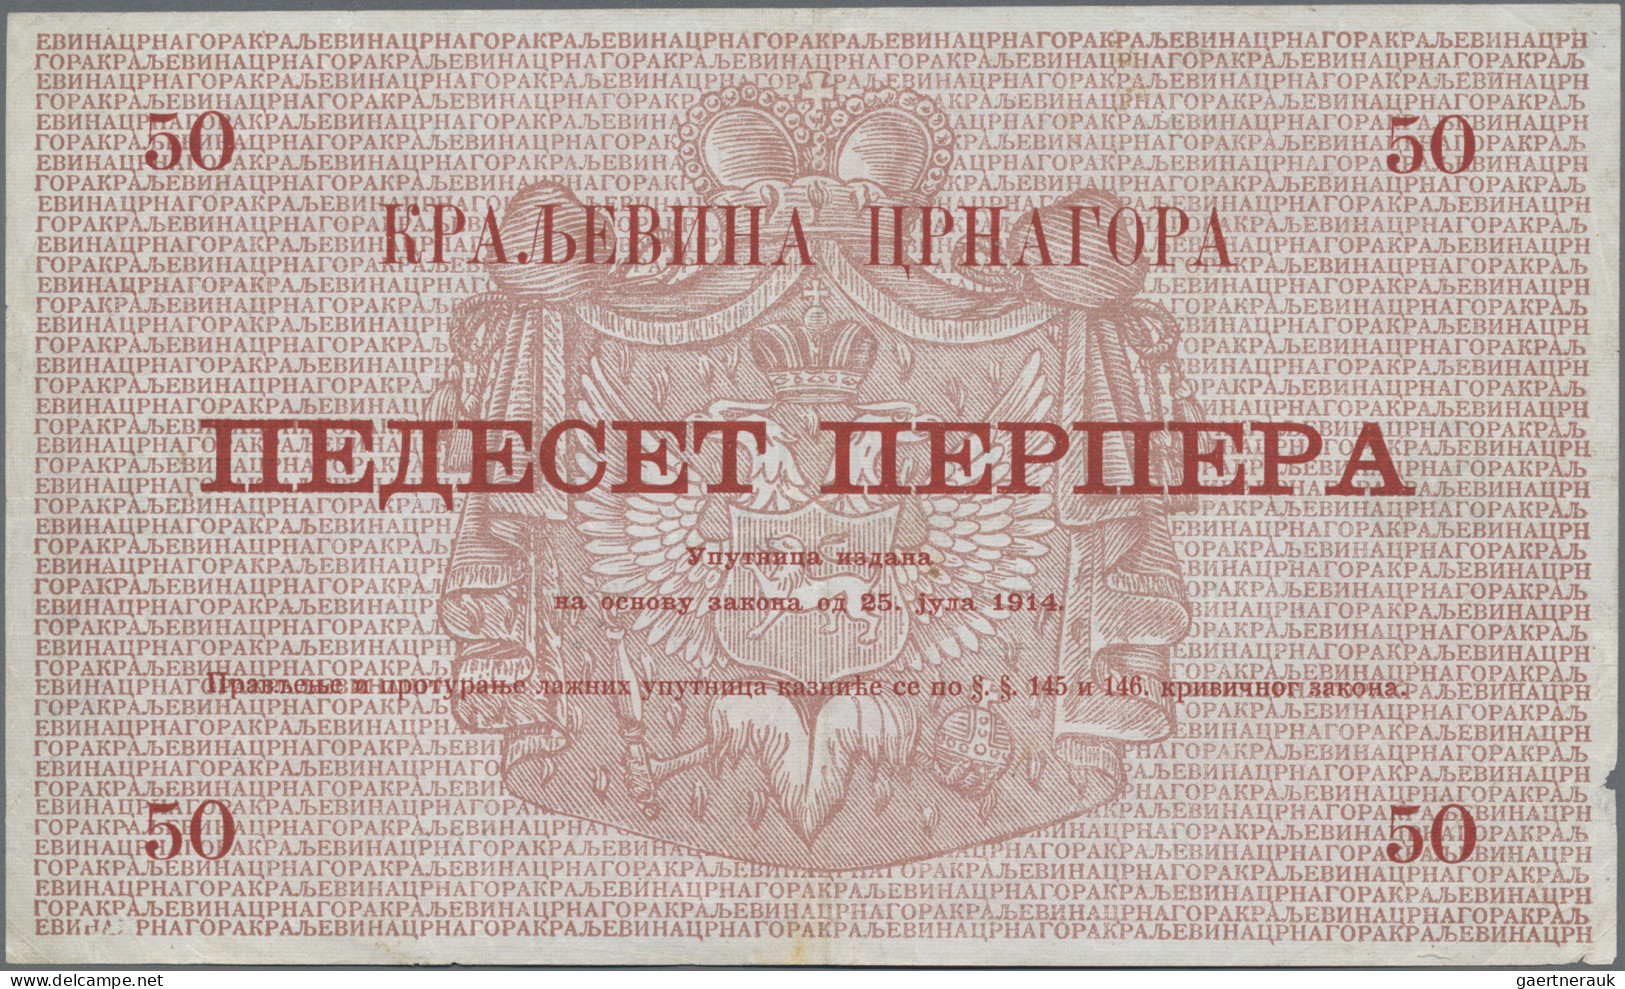 Montenegro: Kingdom Of Montenegro – Royal Government, Set With 10 Perpera 1914 ( - Other - Europe